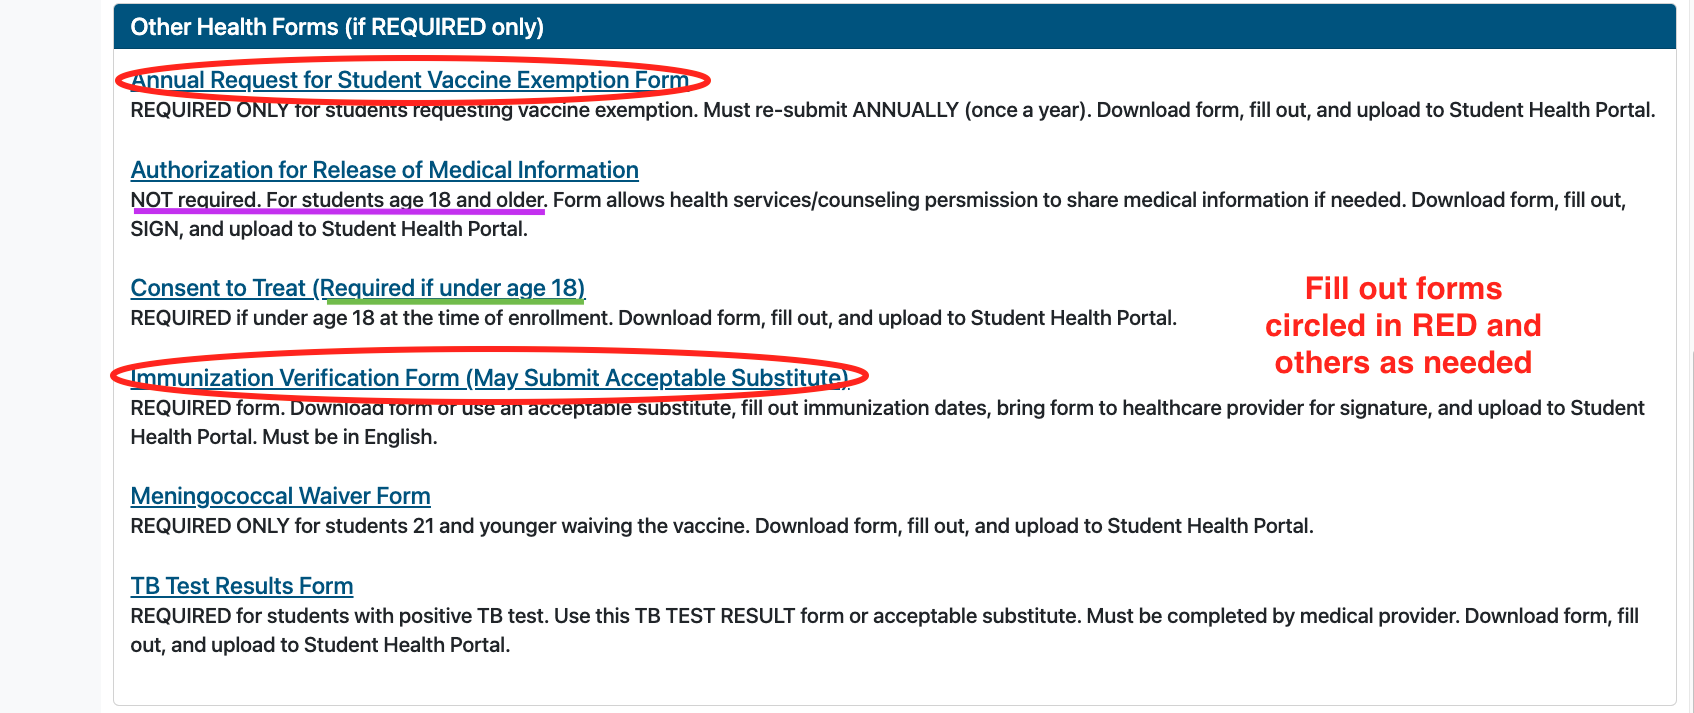 Instructions for the second step of the student health portal